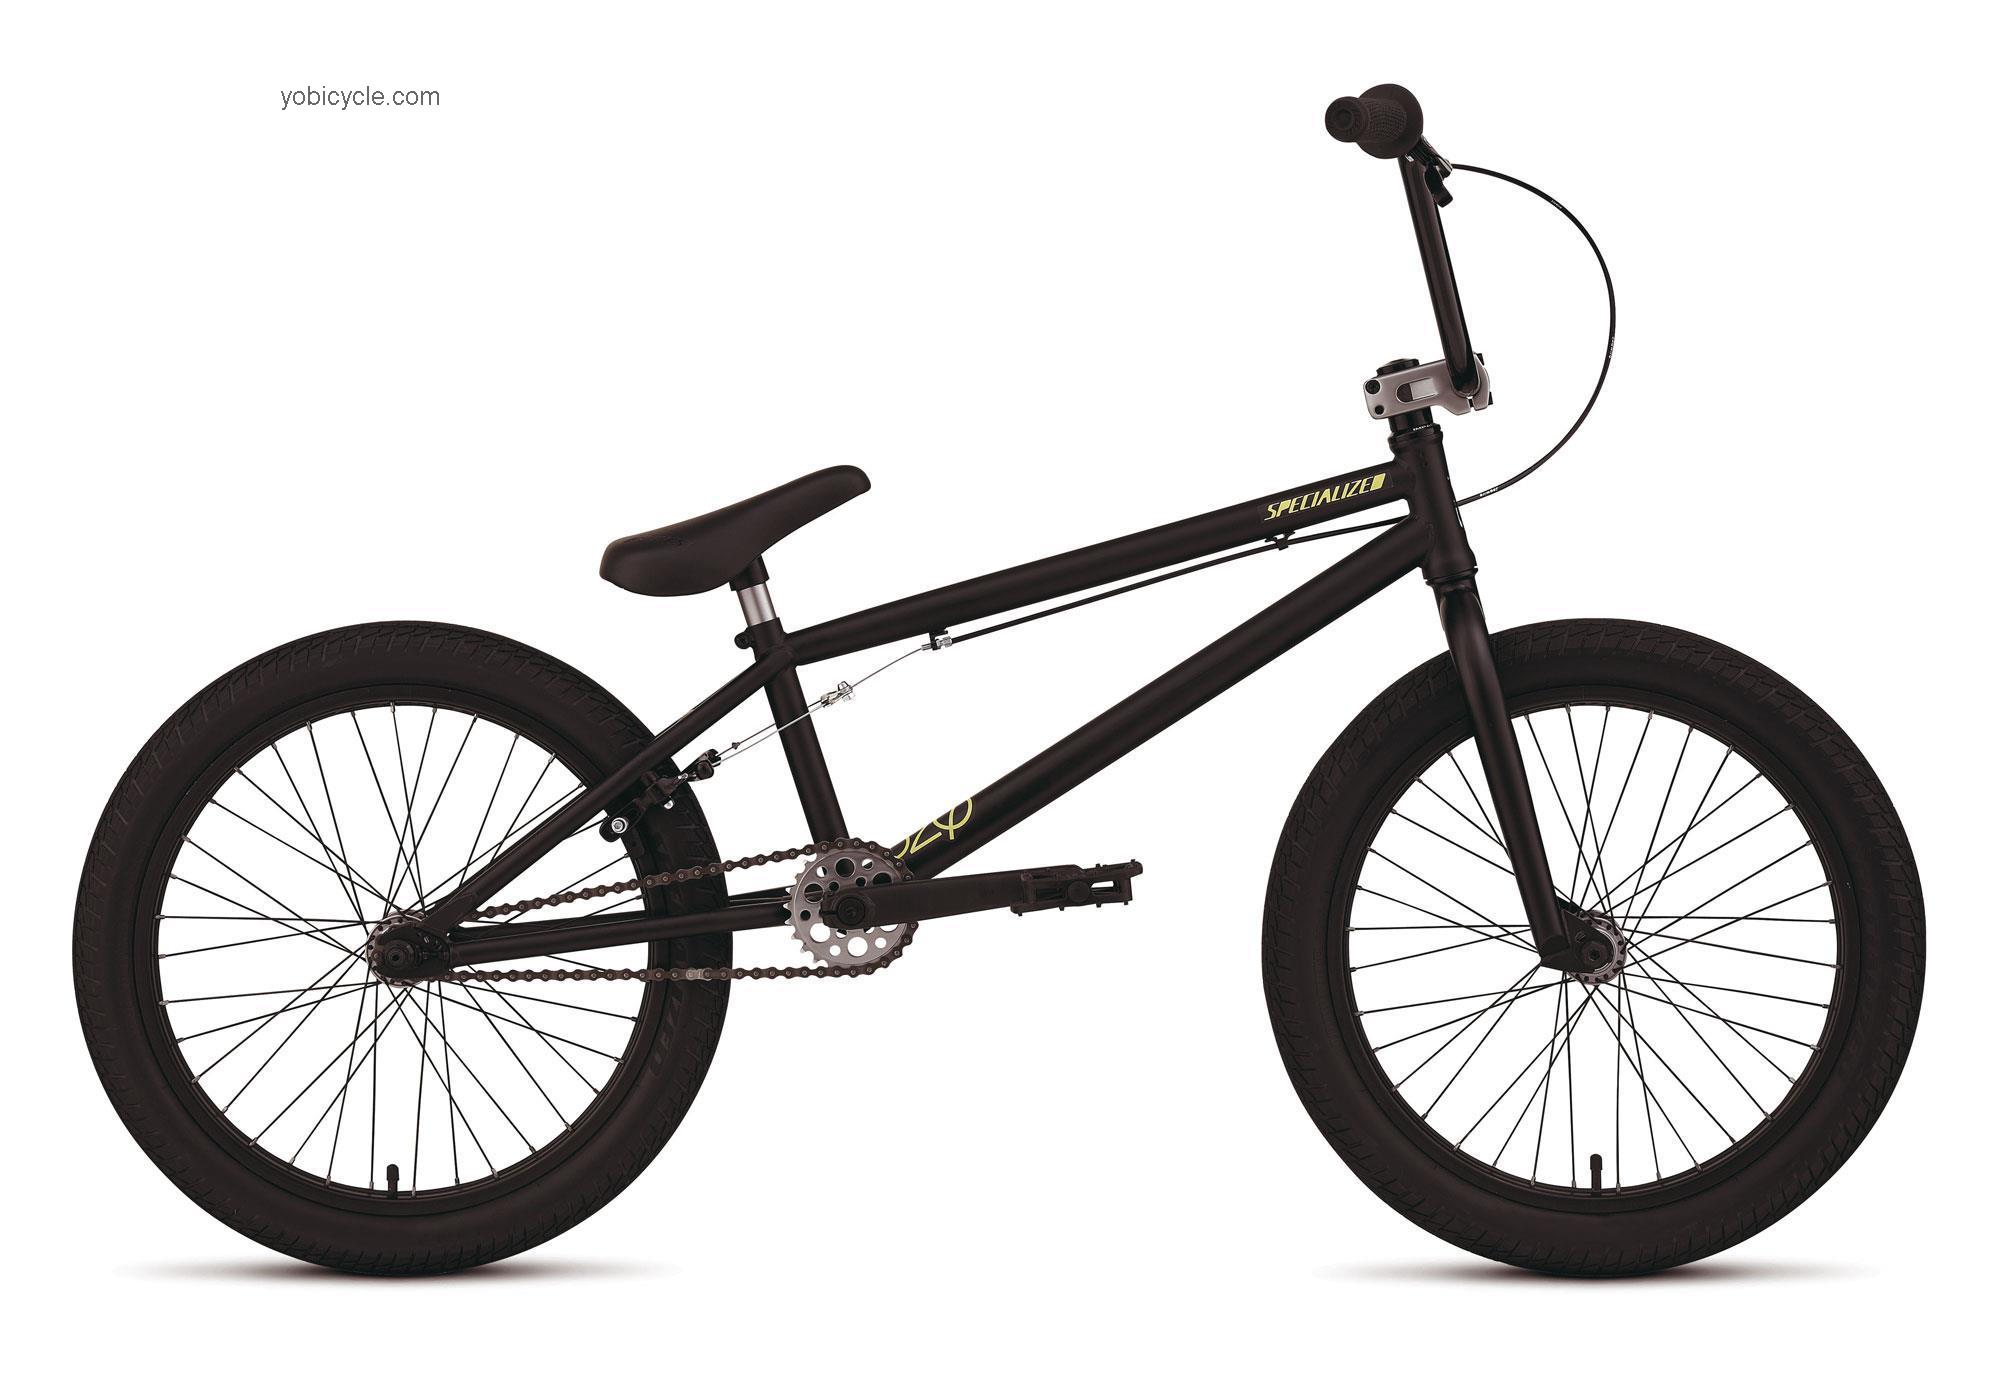 Specialized P20 2012 comparison online with competitors